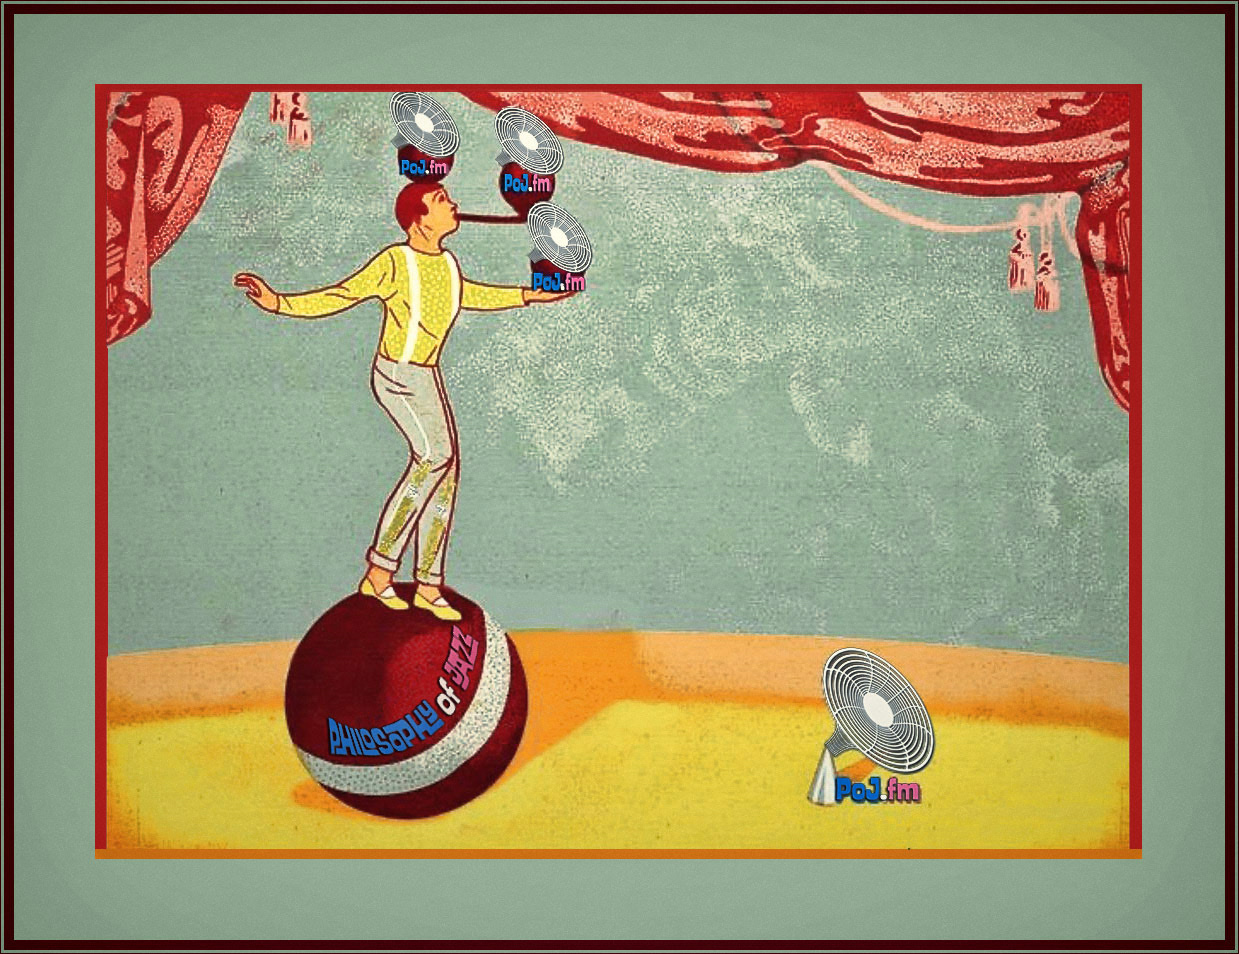 A framed cartoon style drawing of a unicycle style juggler juggling three balls that have PoJ.fm logo on them with a creamy yellow background.